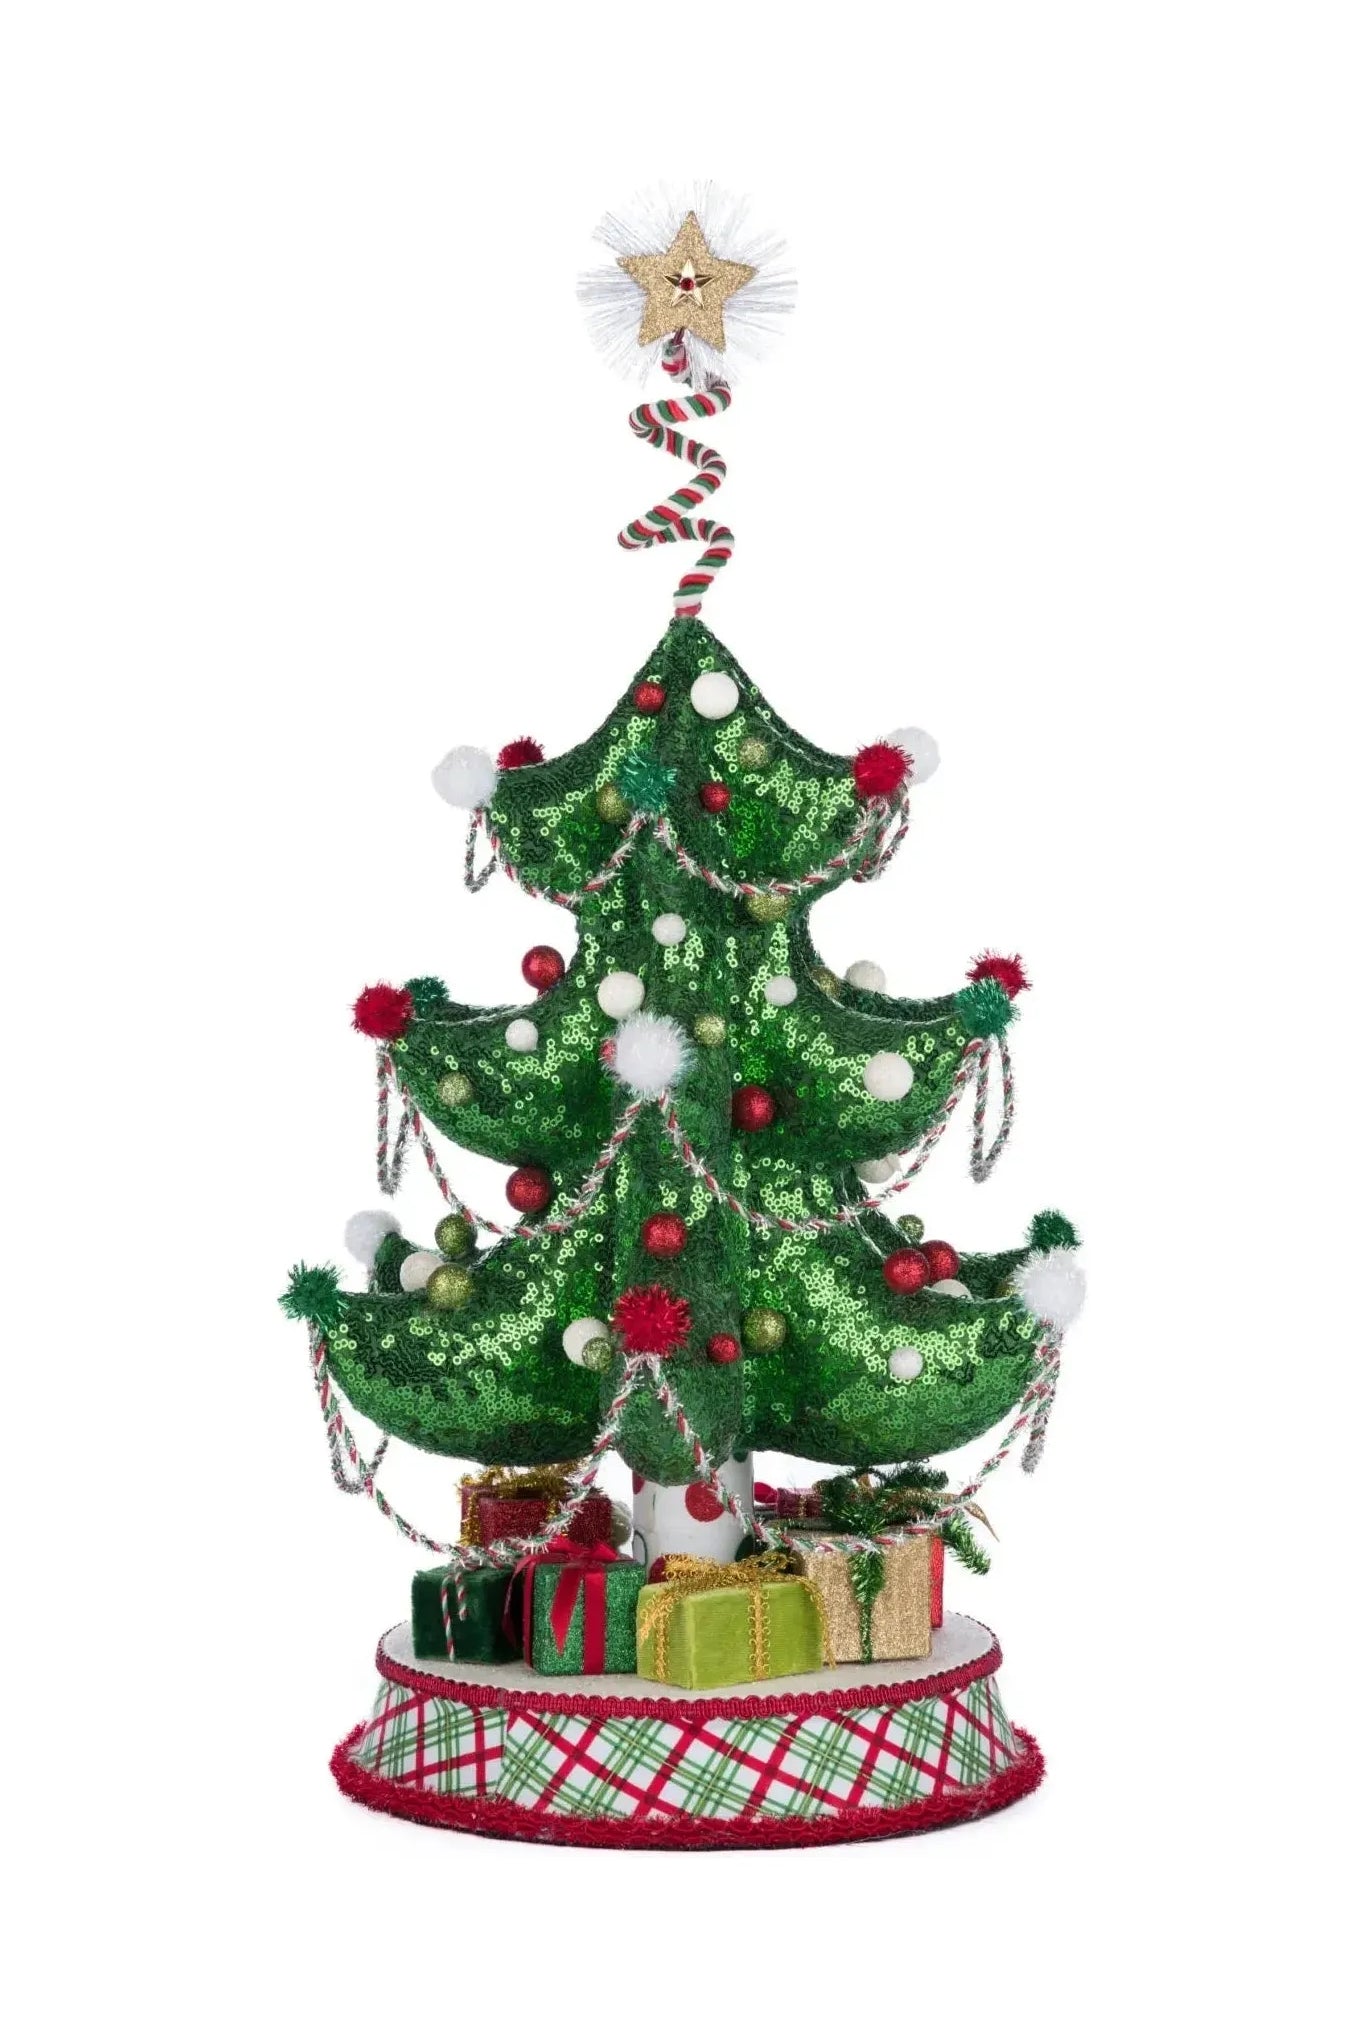 Shop For Whimsical Table Top Tree 28-428348